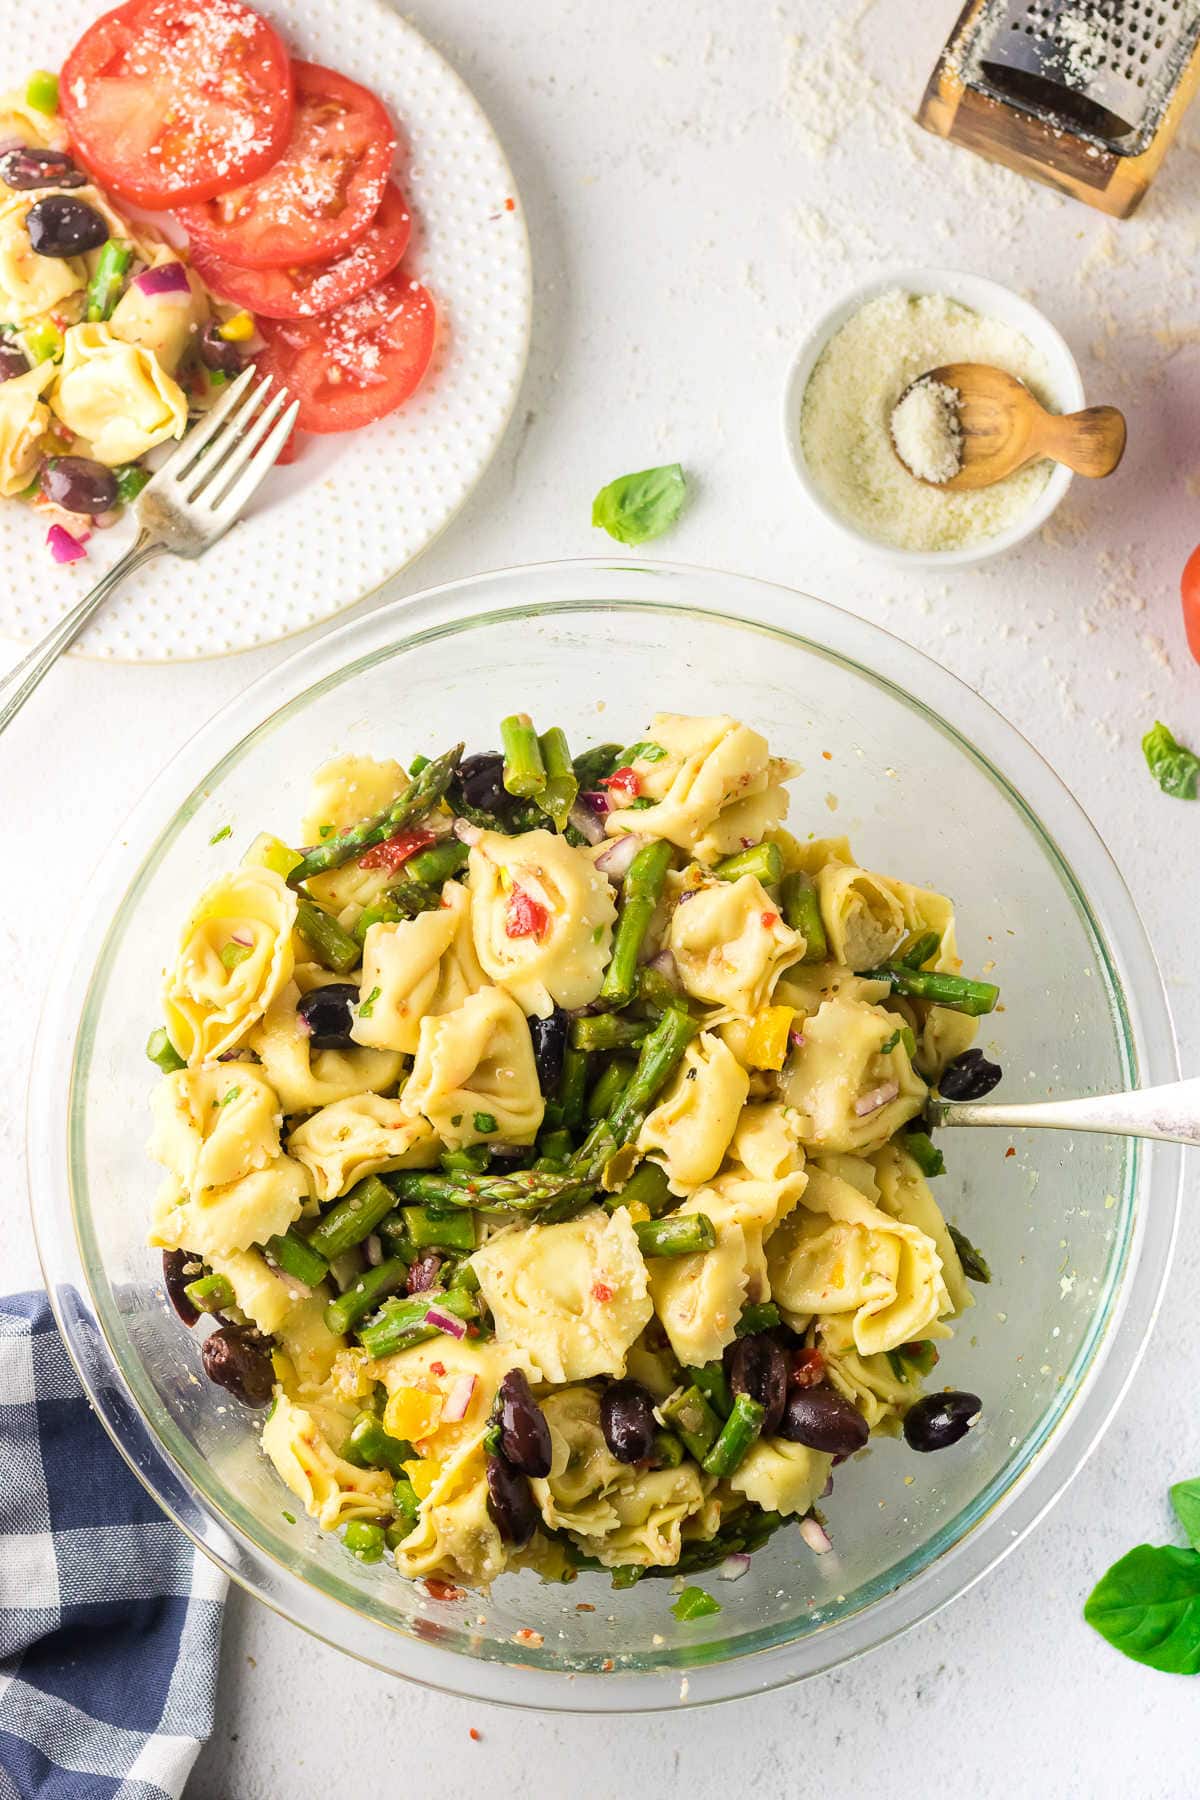 Overhead view of a bowl of tortellini salad on a table.